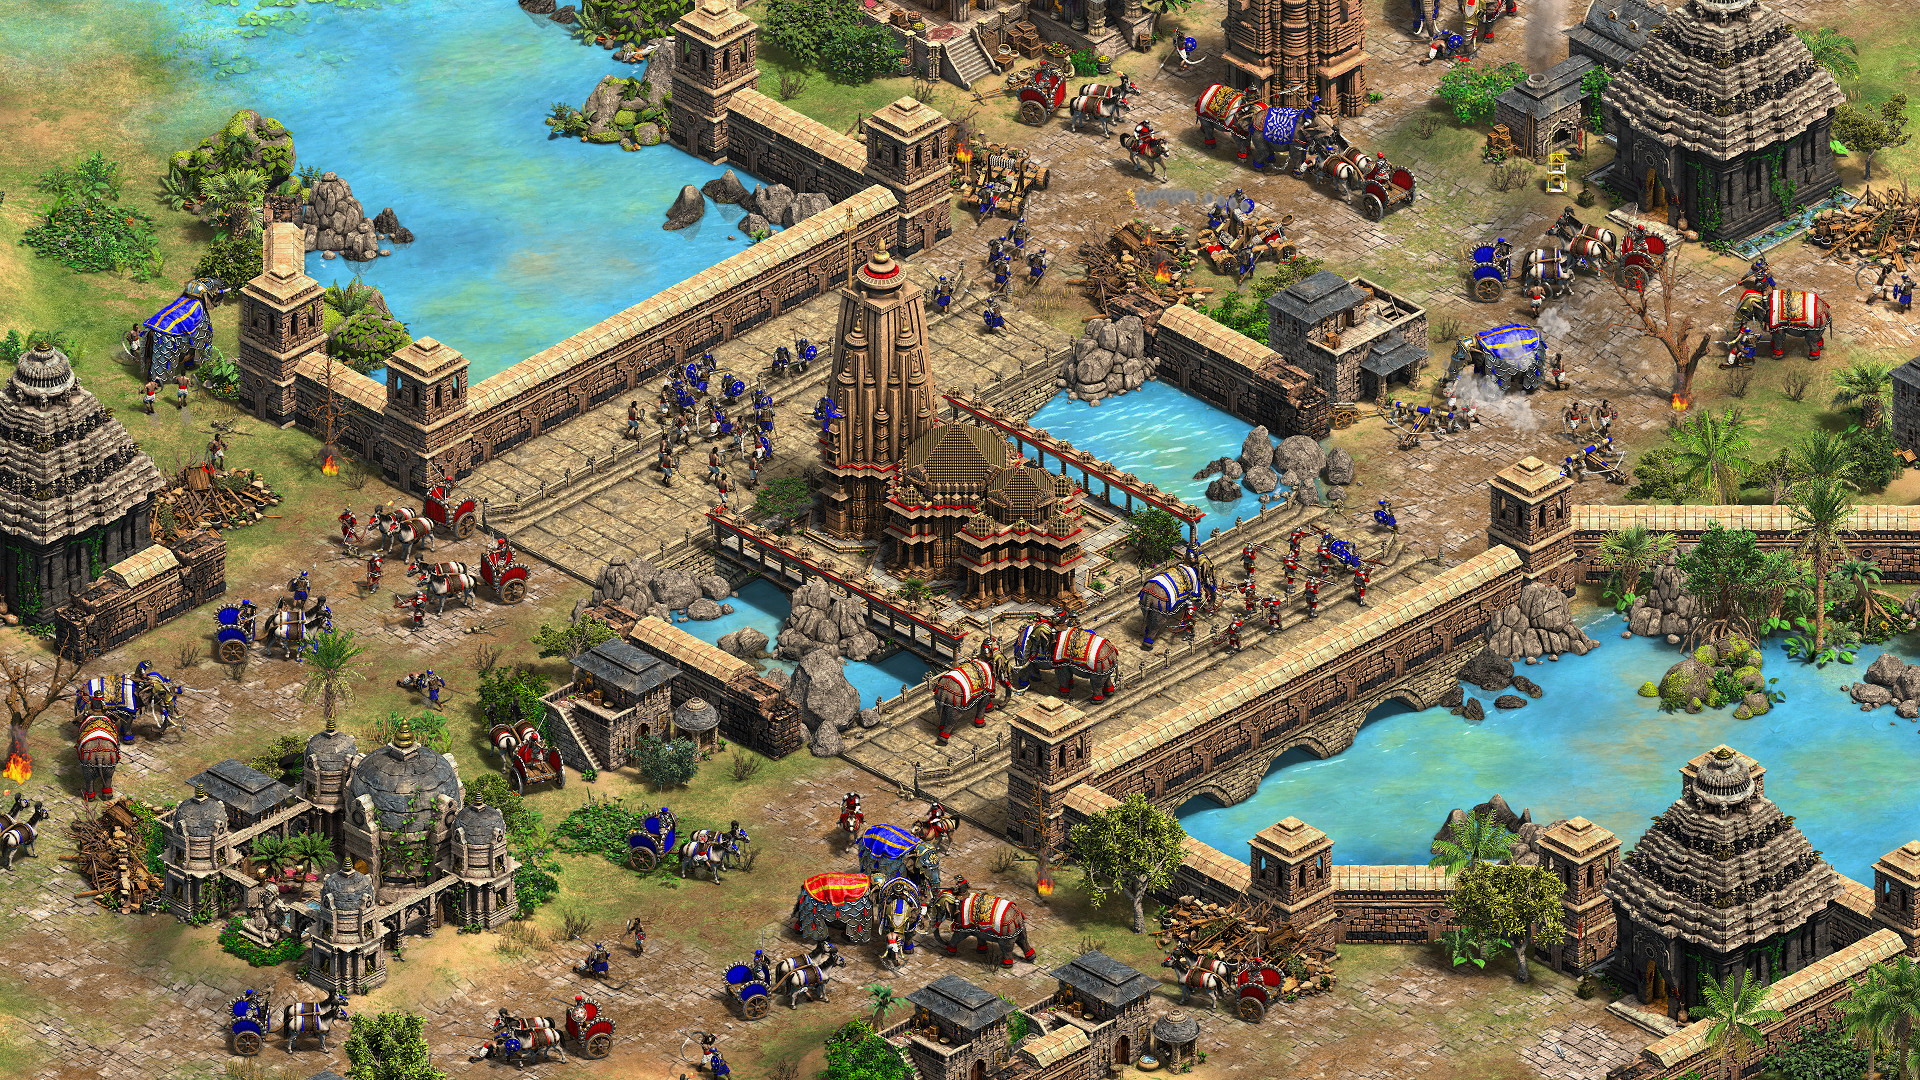 Age of Empires II: Definitive Edition - Dynasties of India - screenshot 4